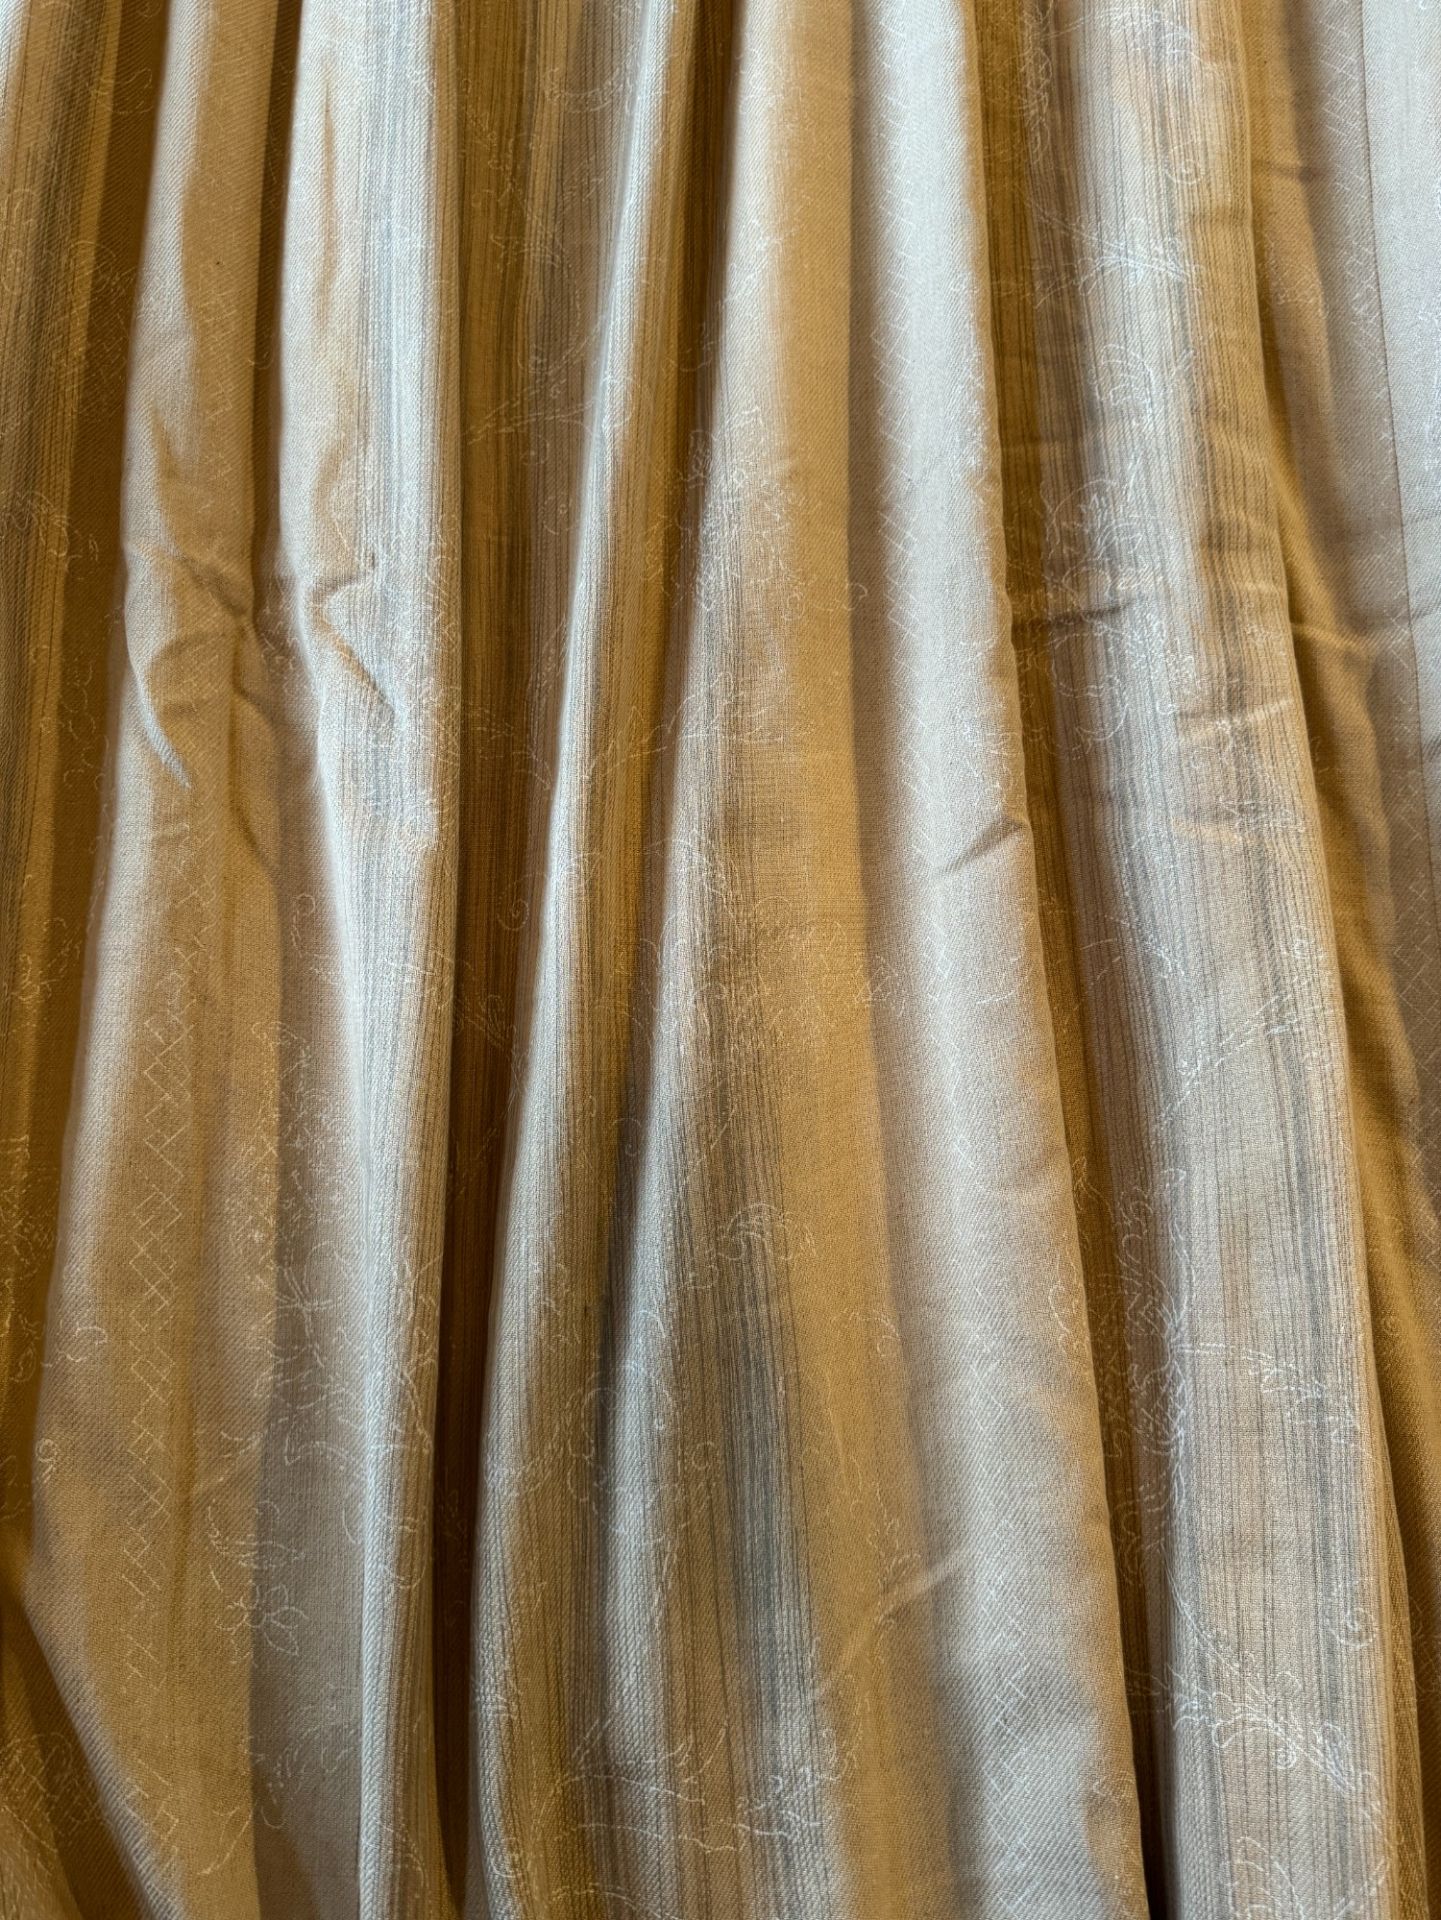 A pair of pinch pleat, lined and interlined Jim Thompson dusky pink fabric curtains together with a - Image 2 of 5